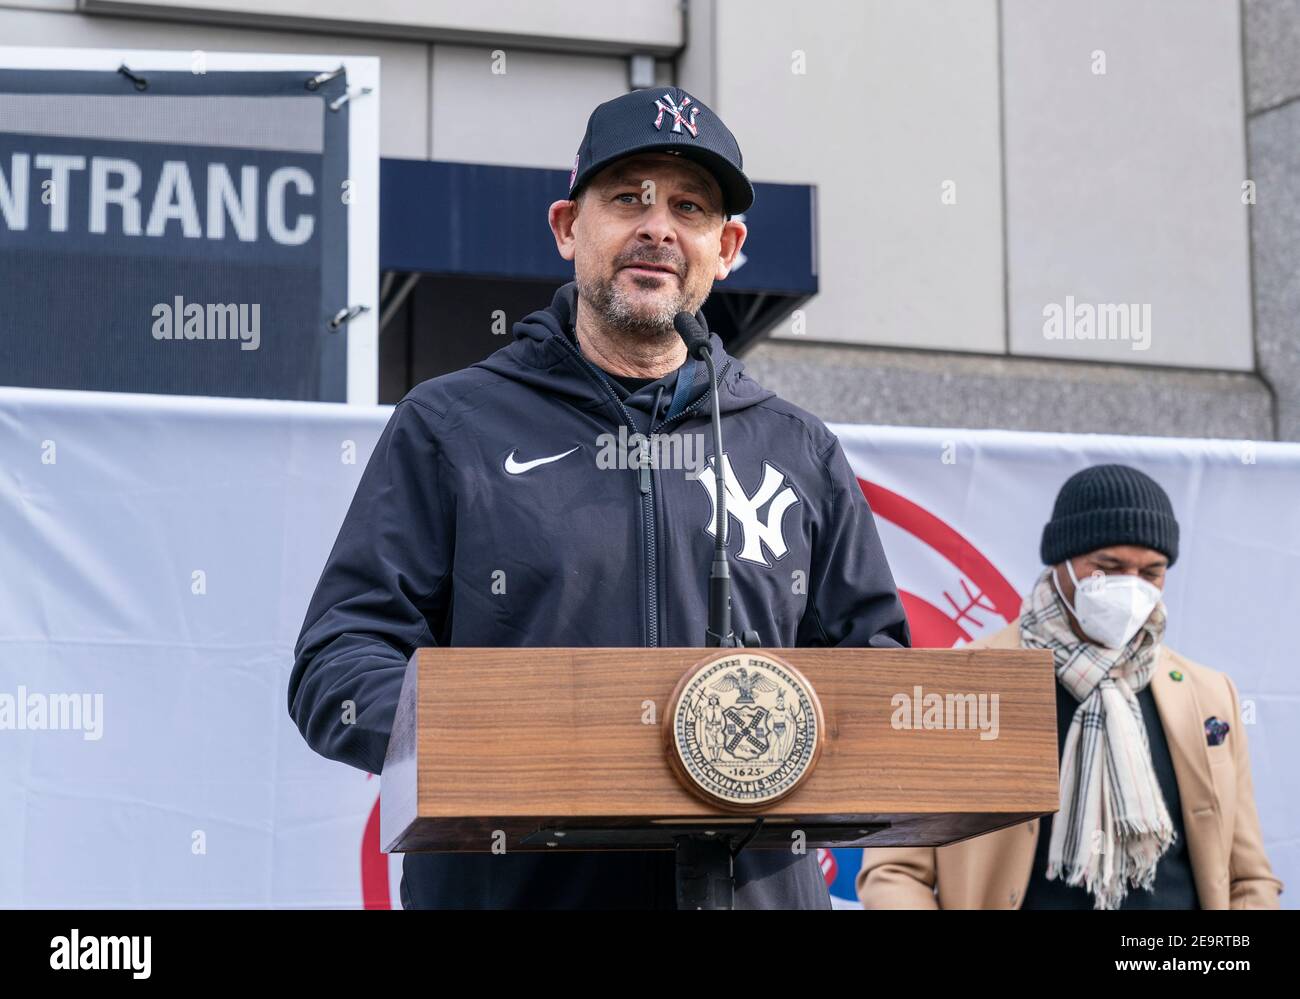 Aaron boone 2003 hi-res stock photography and images - Alamy